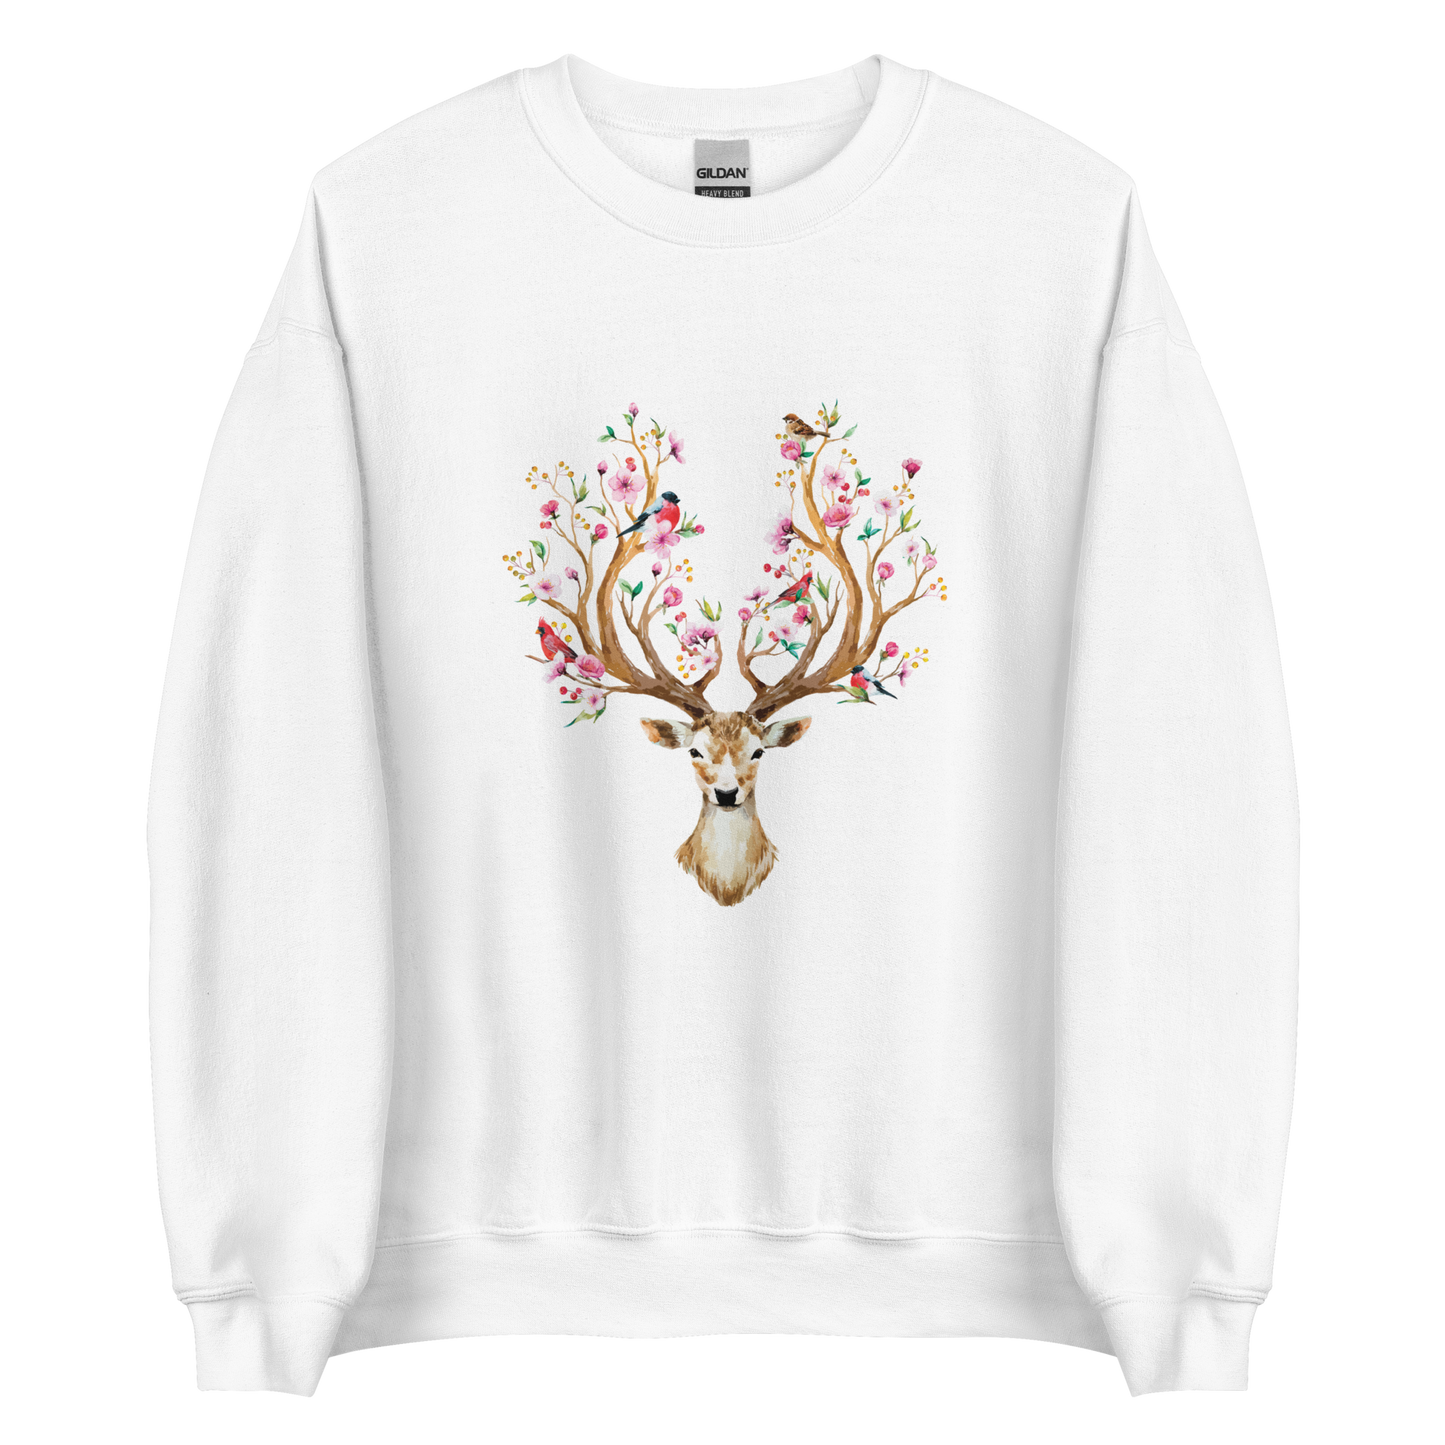 White Floral Red Deer Sweatshirt featuring a delightful Floral Deer graphic on the chest - Cute Graphic Deer Sweatshirts - Boozy Fox